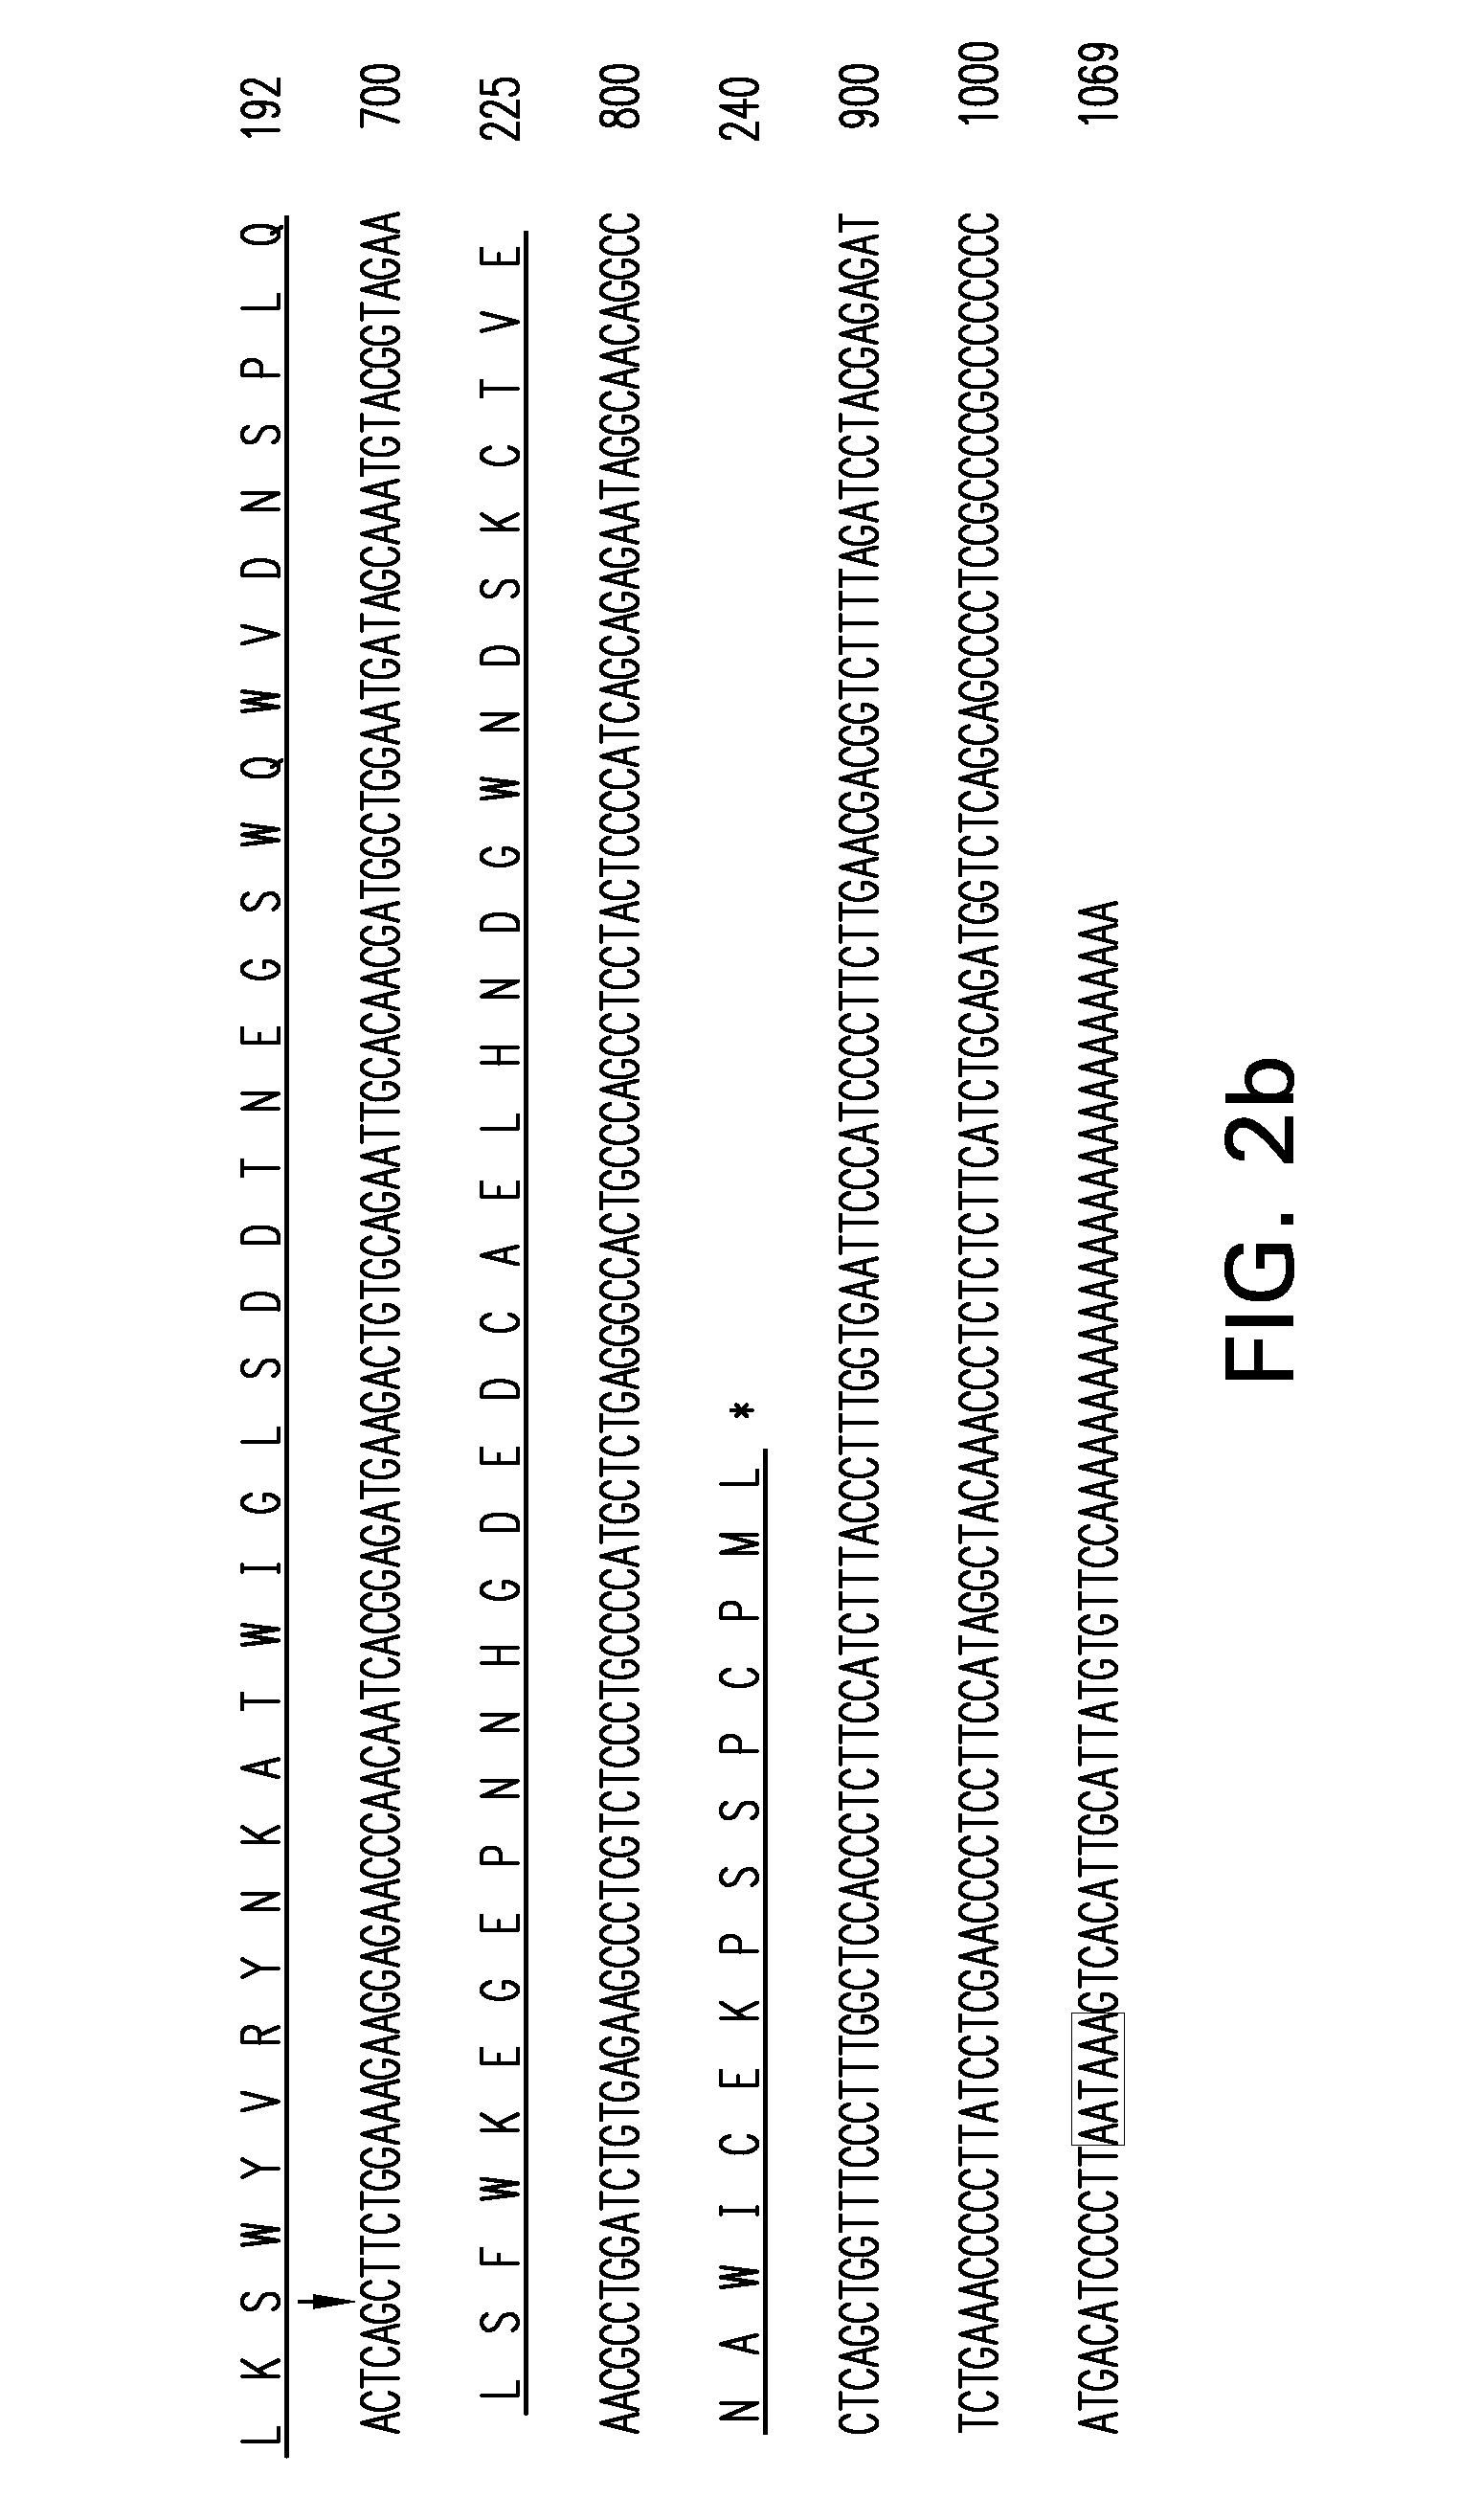 Porcine DC-SIGN, ICAM-3 and LSECtin and uses thereof